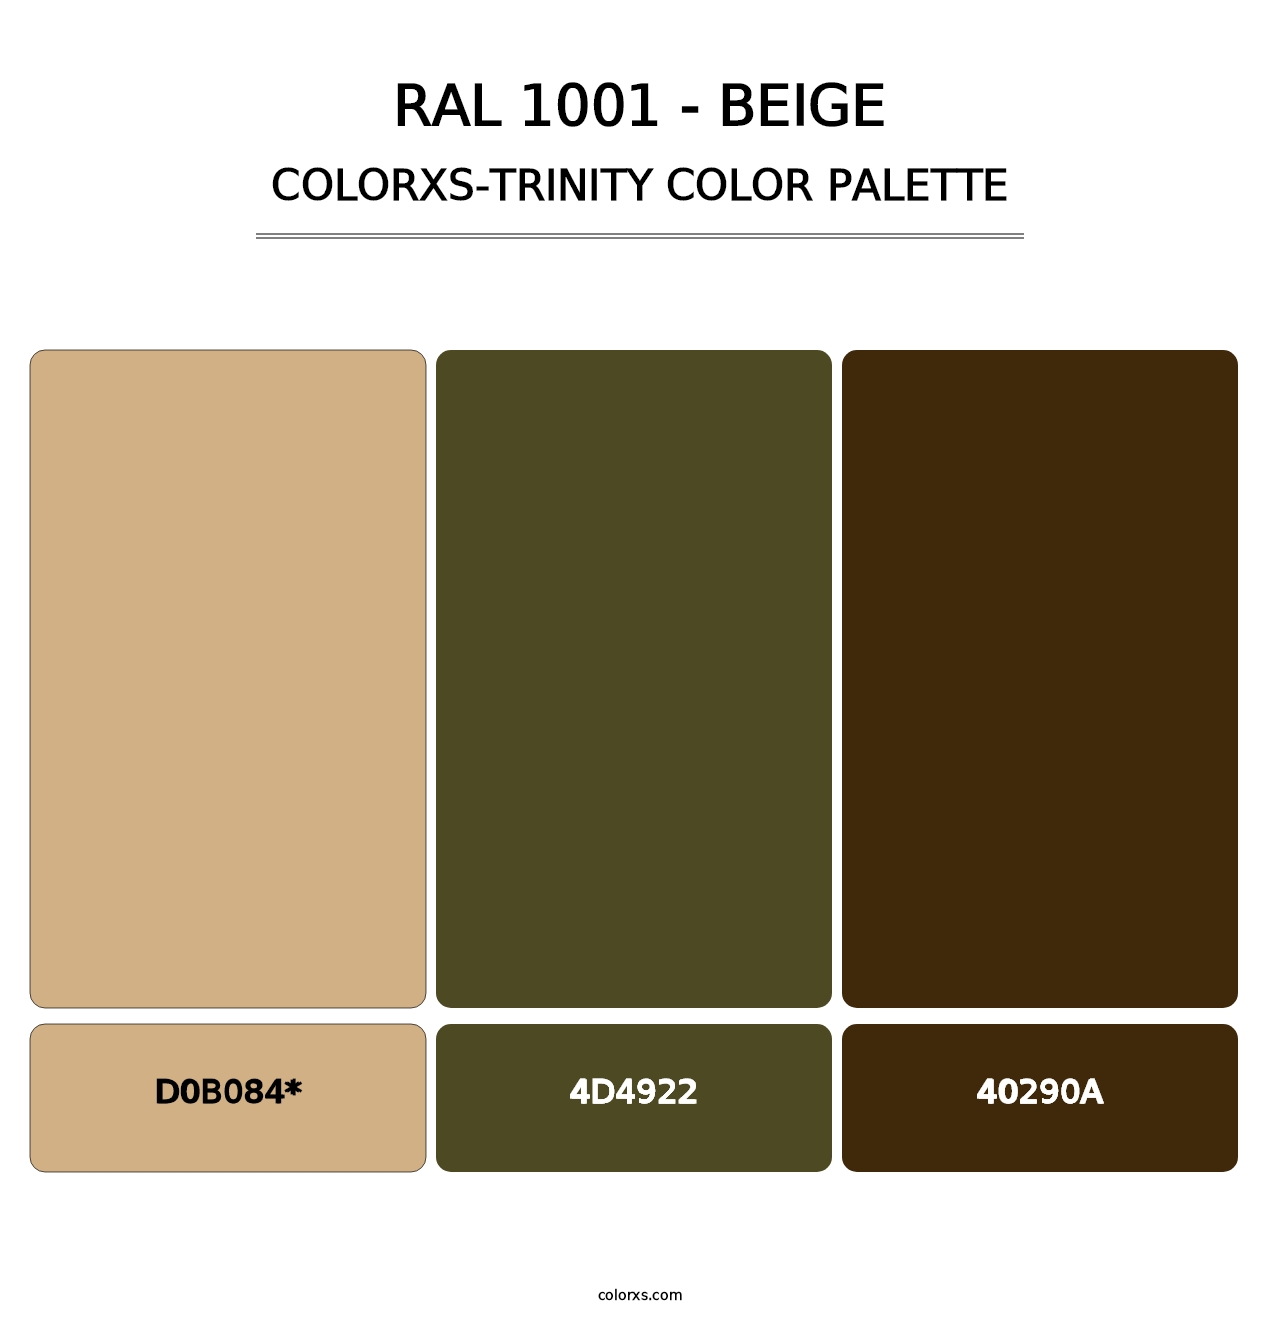 RAL 1001 - Beige - Colorxs Trinity Palette